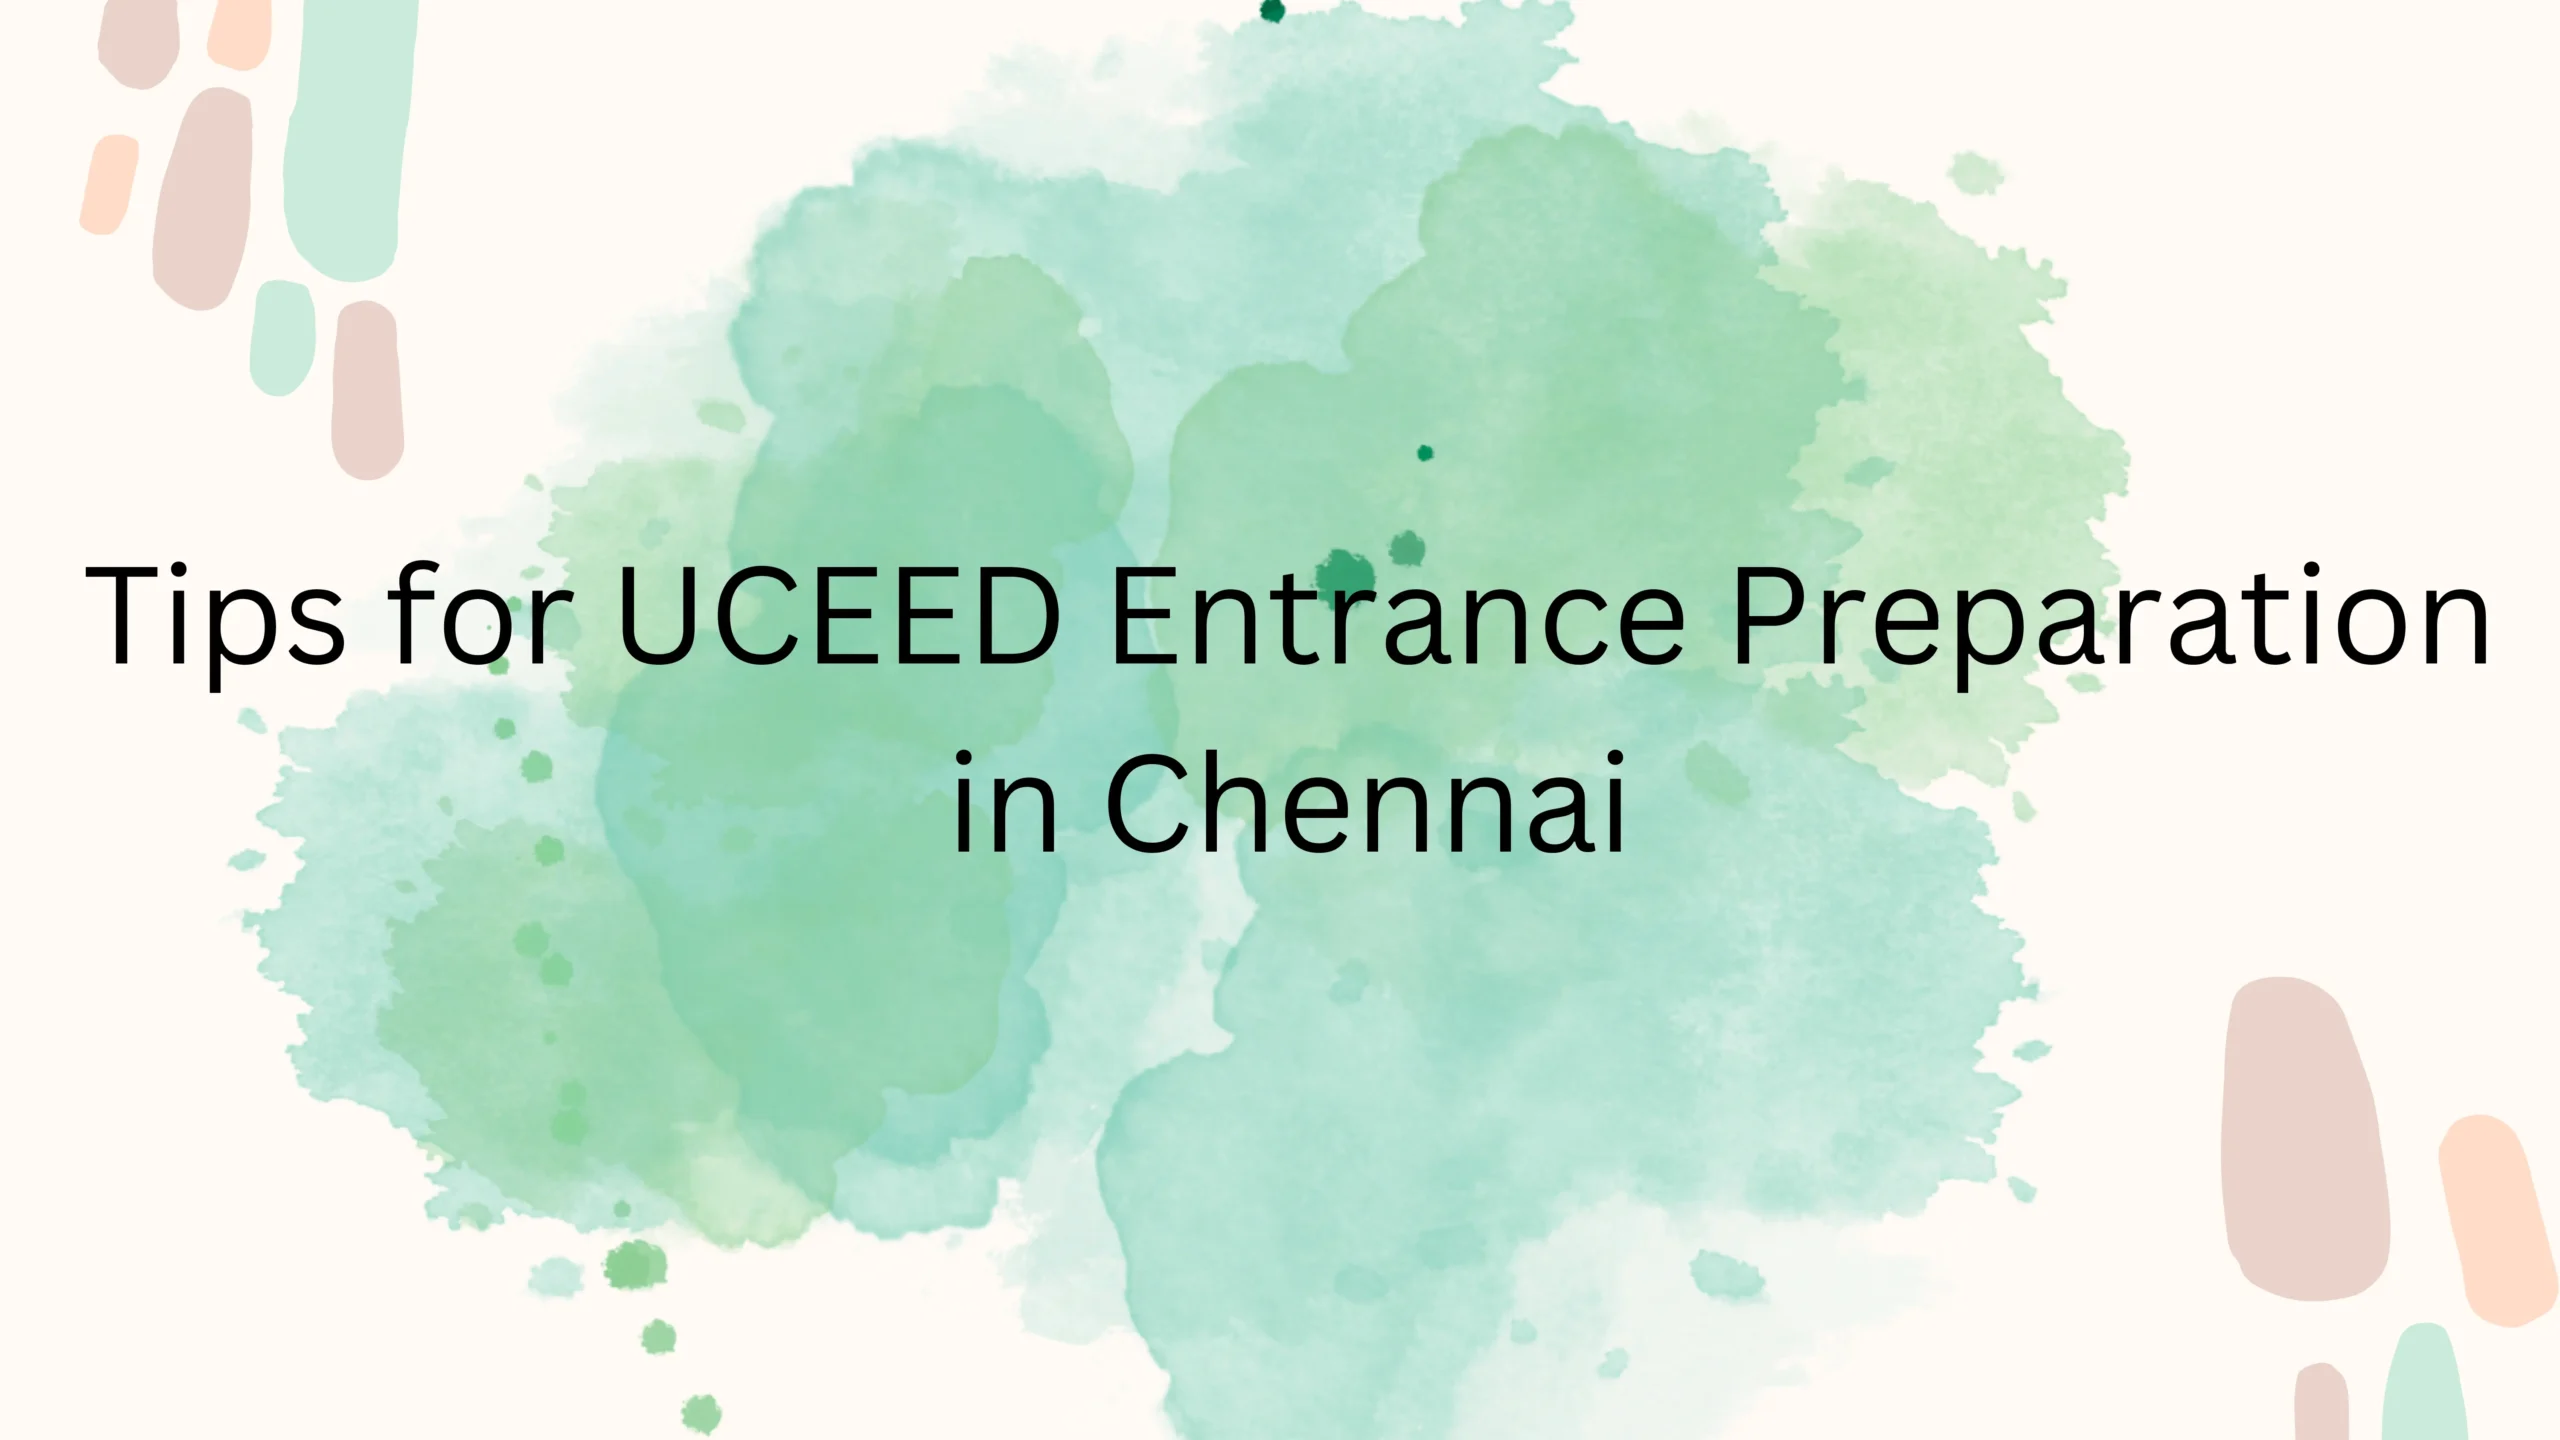 Tips for UCEED Entrance Preparation in Chennai